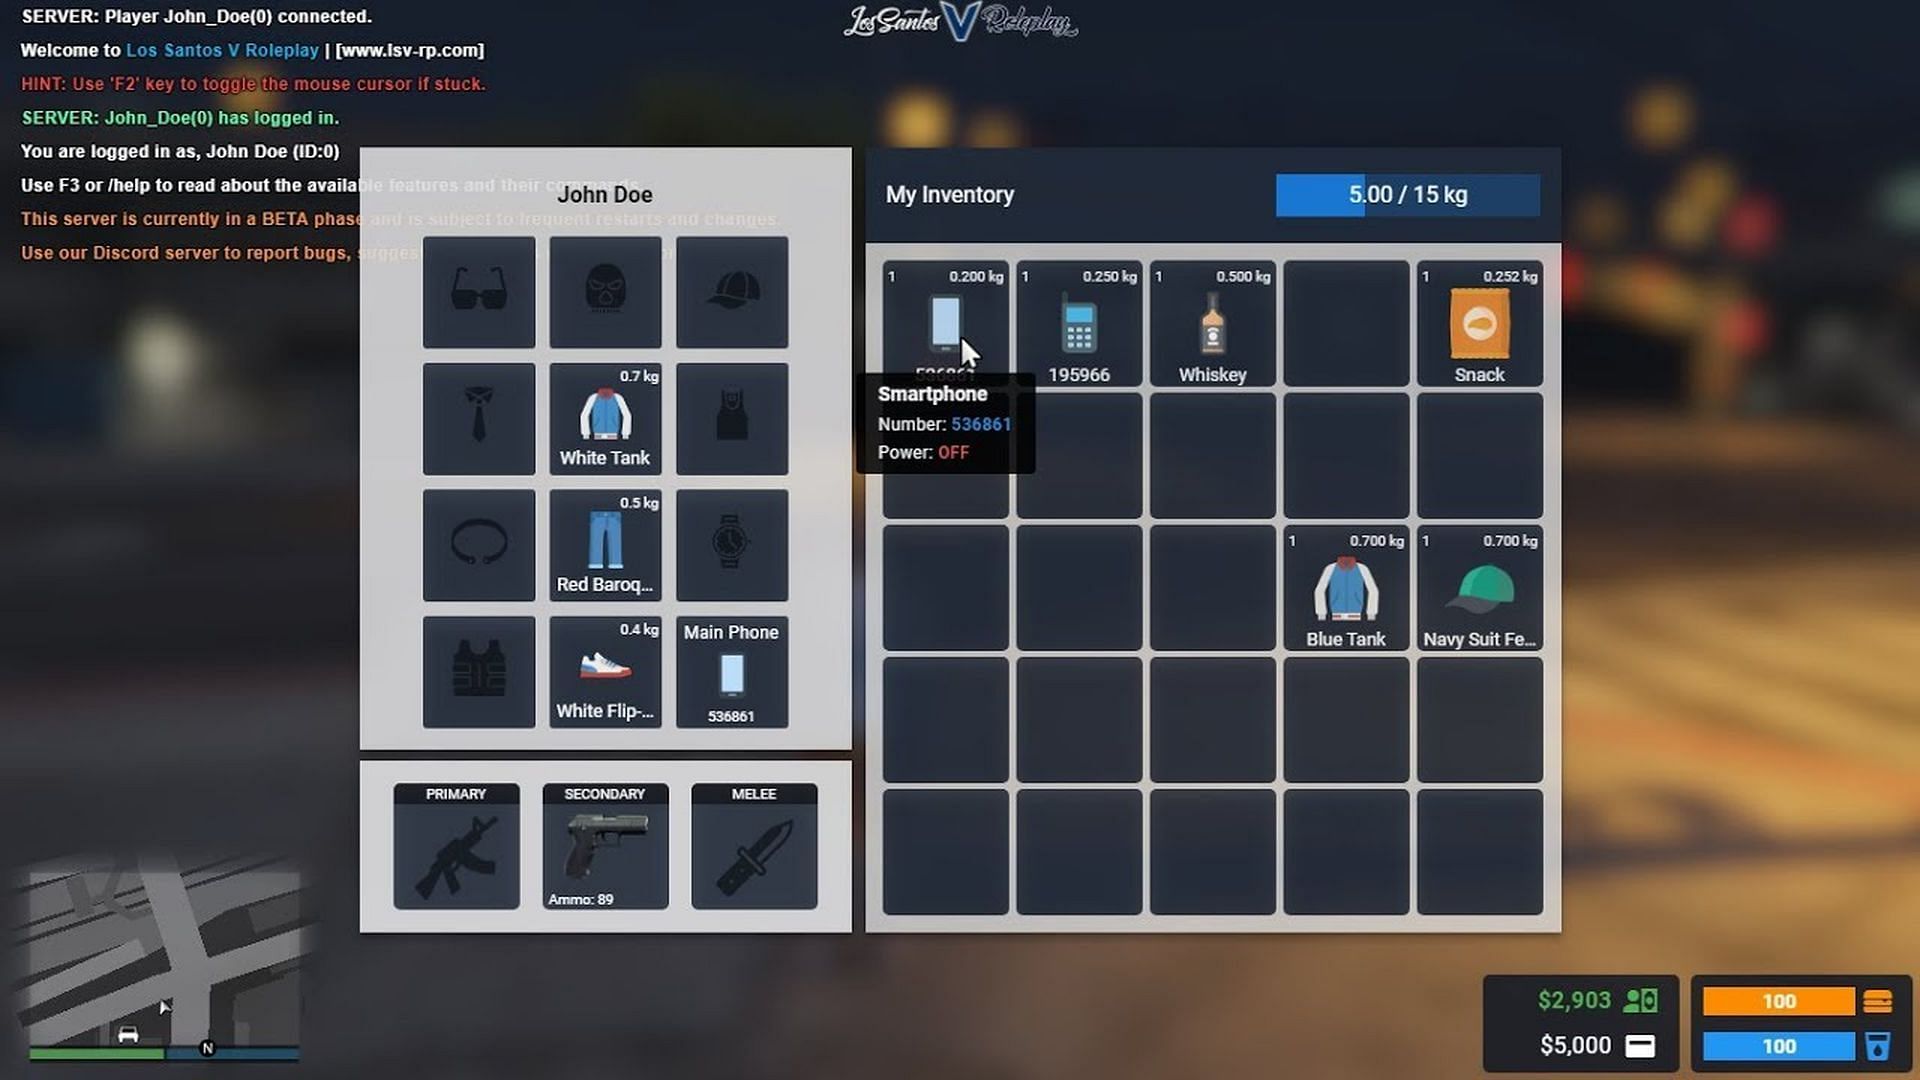 An example of a server with an inventory-based system (Image via Los Santos V Roleplay)